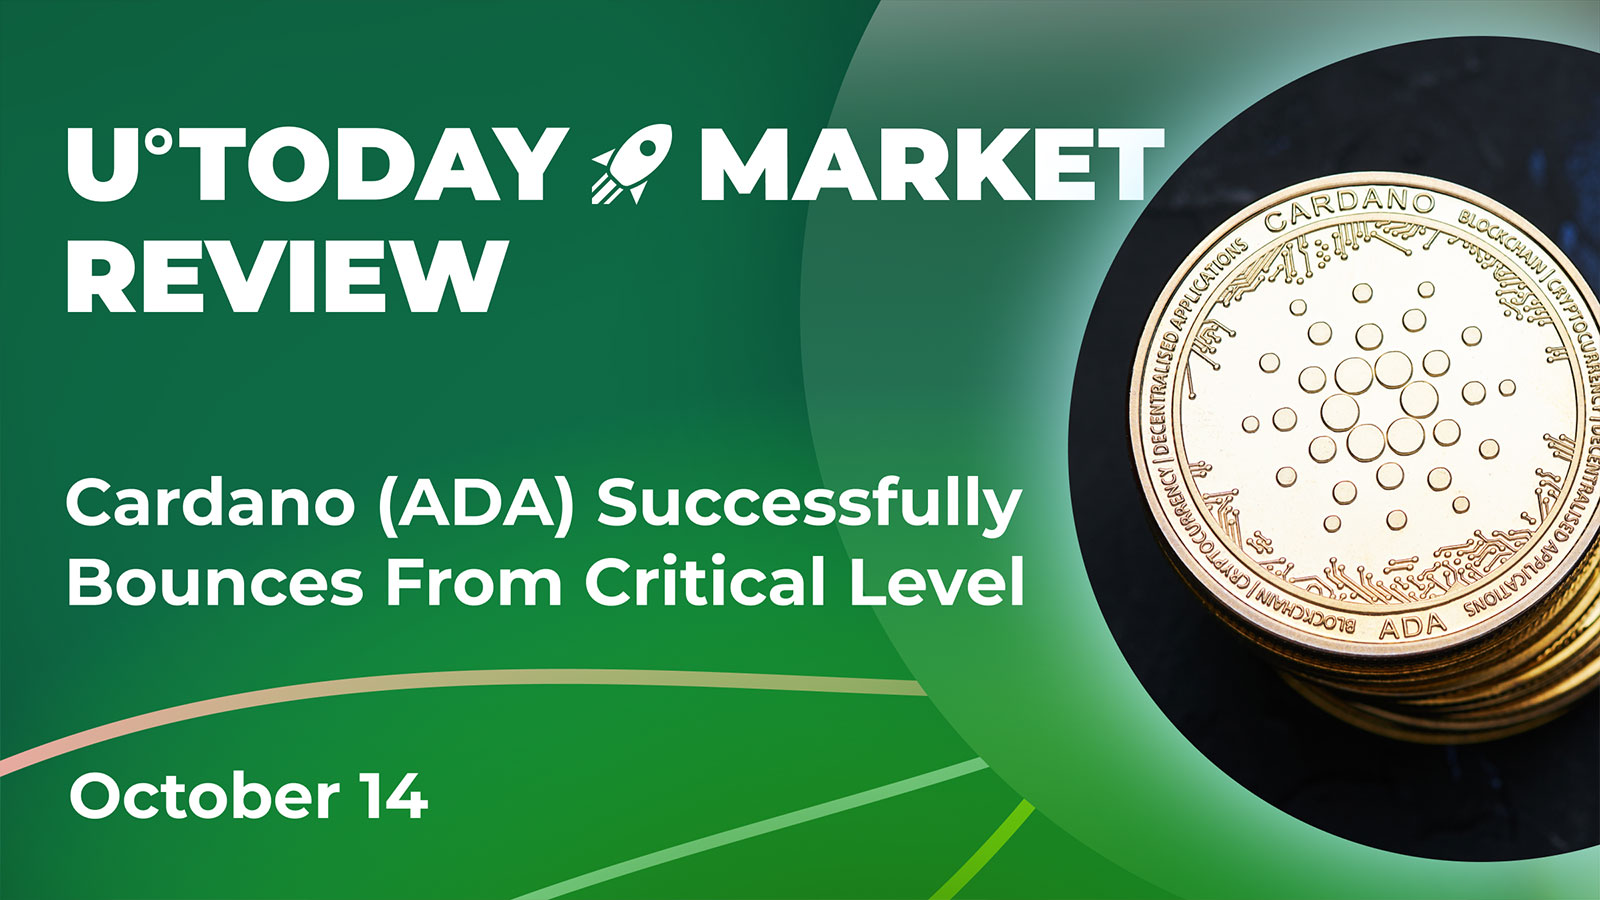 Cardano (ADA) Successfully Bounces From Critical Level: Crypto Market Review, October 14